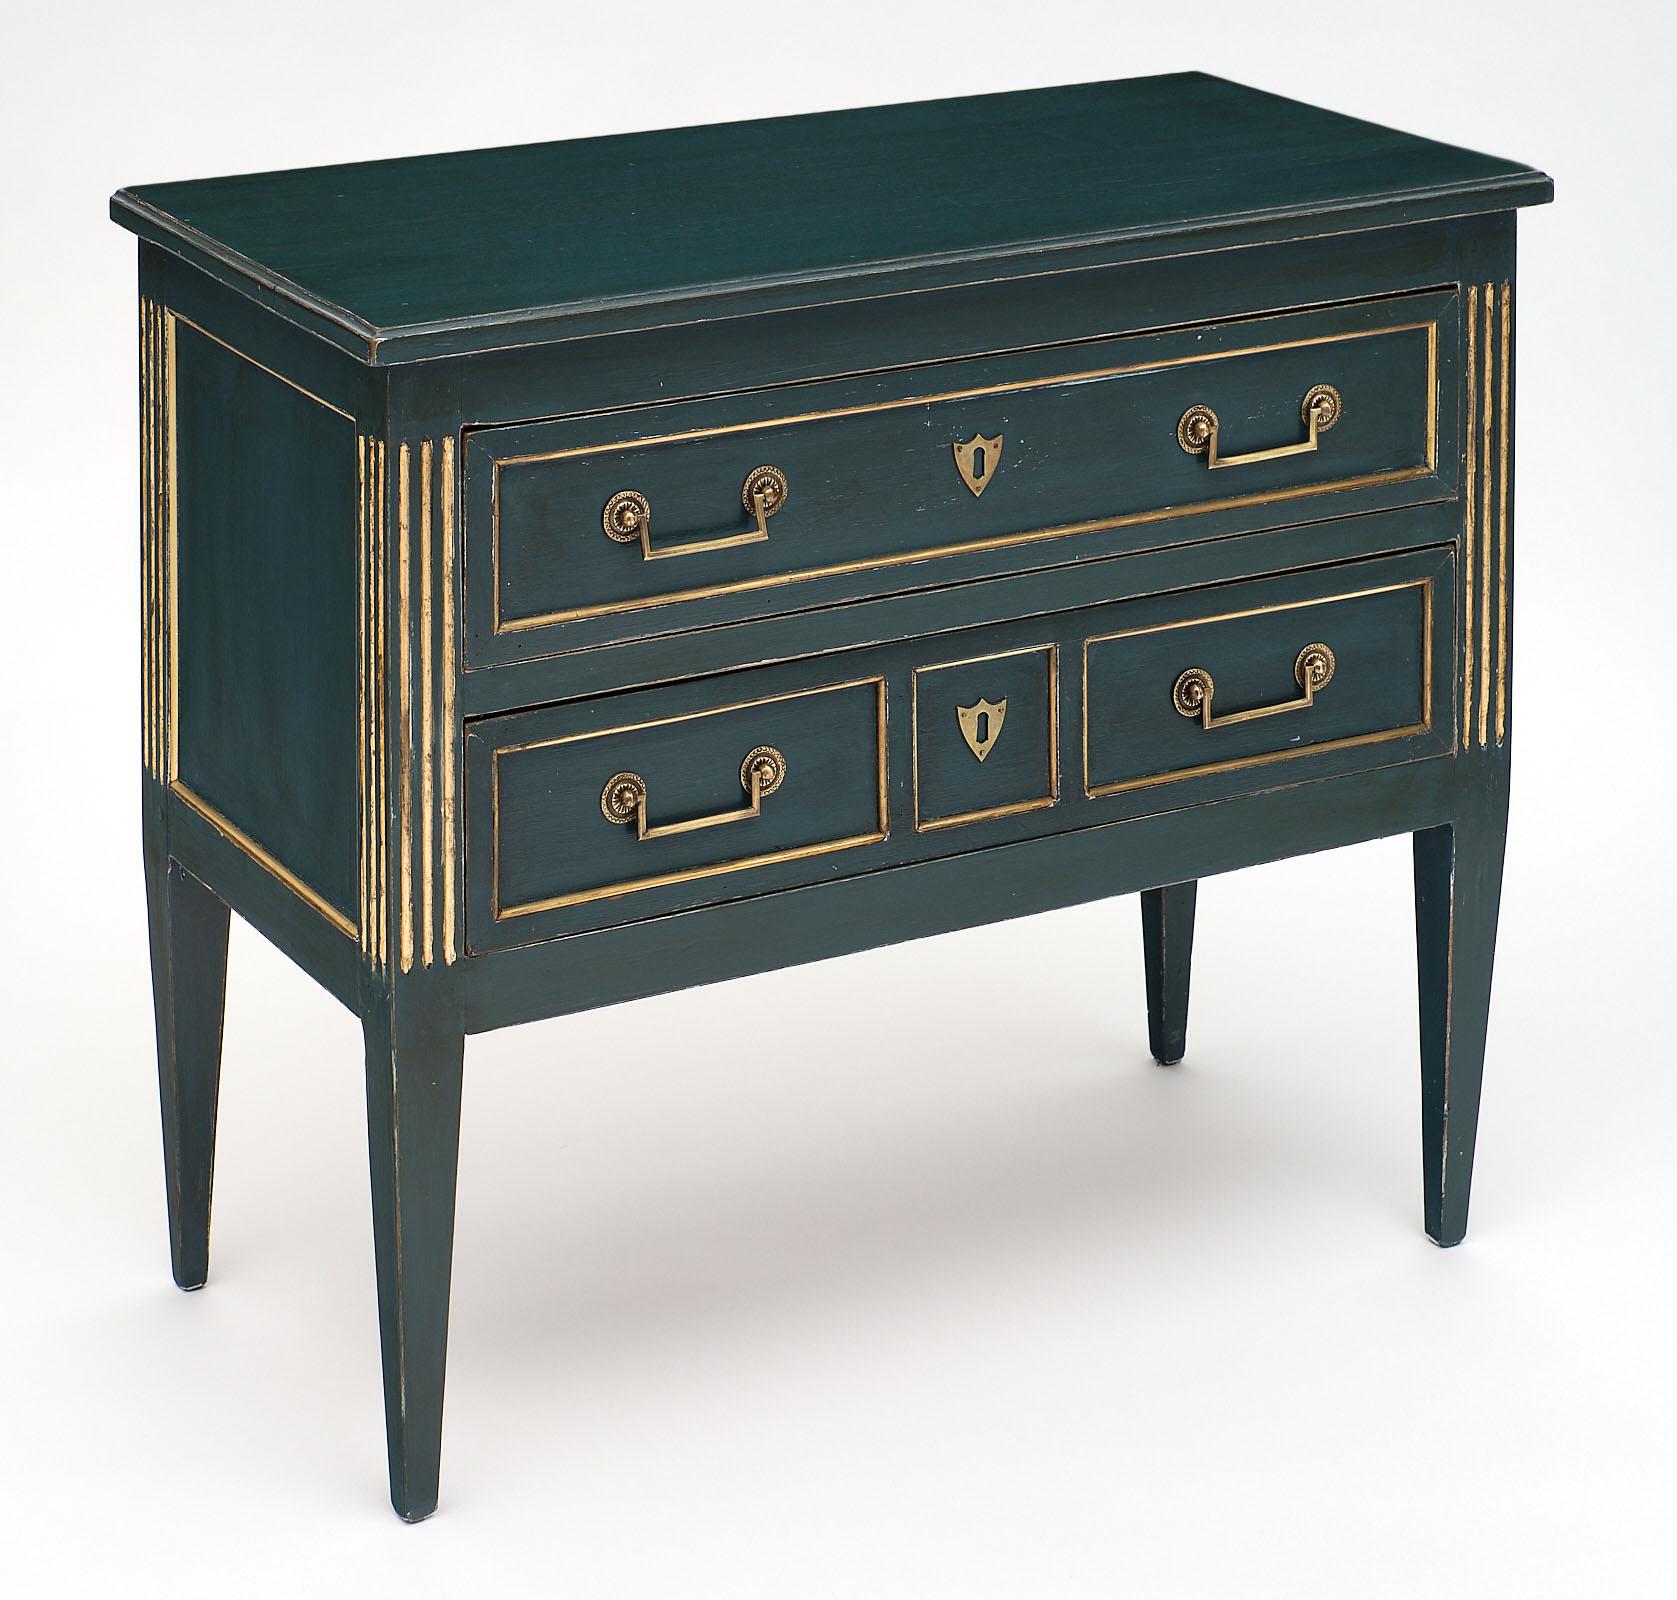 Fine painted antique Louis XVI style French chest of drawers made of solid walnut. It features square brass pulls on two dovetailed drawers. The blue patina gives it a unique look, and we love the gilt brass throughout. It has elegant proportions,